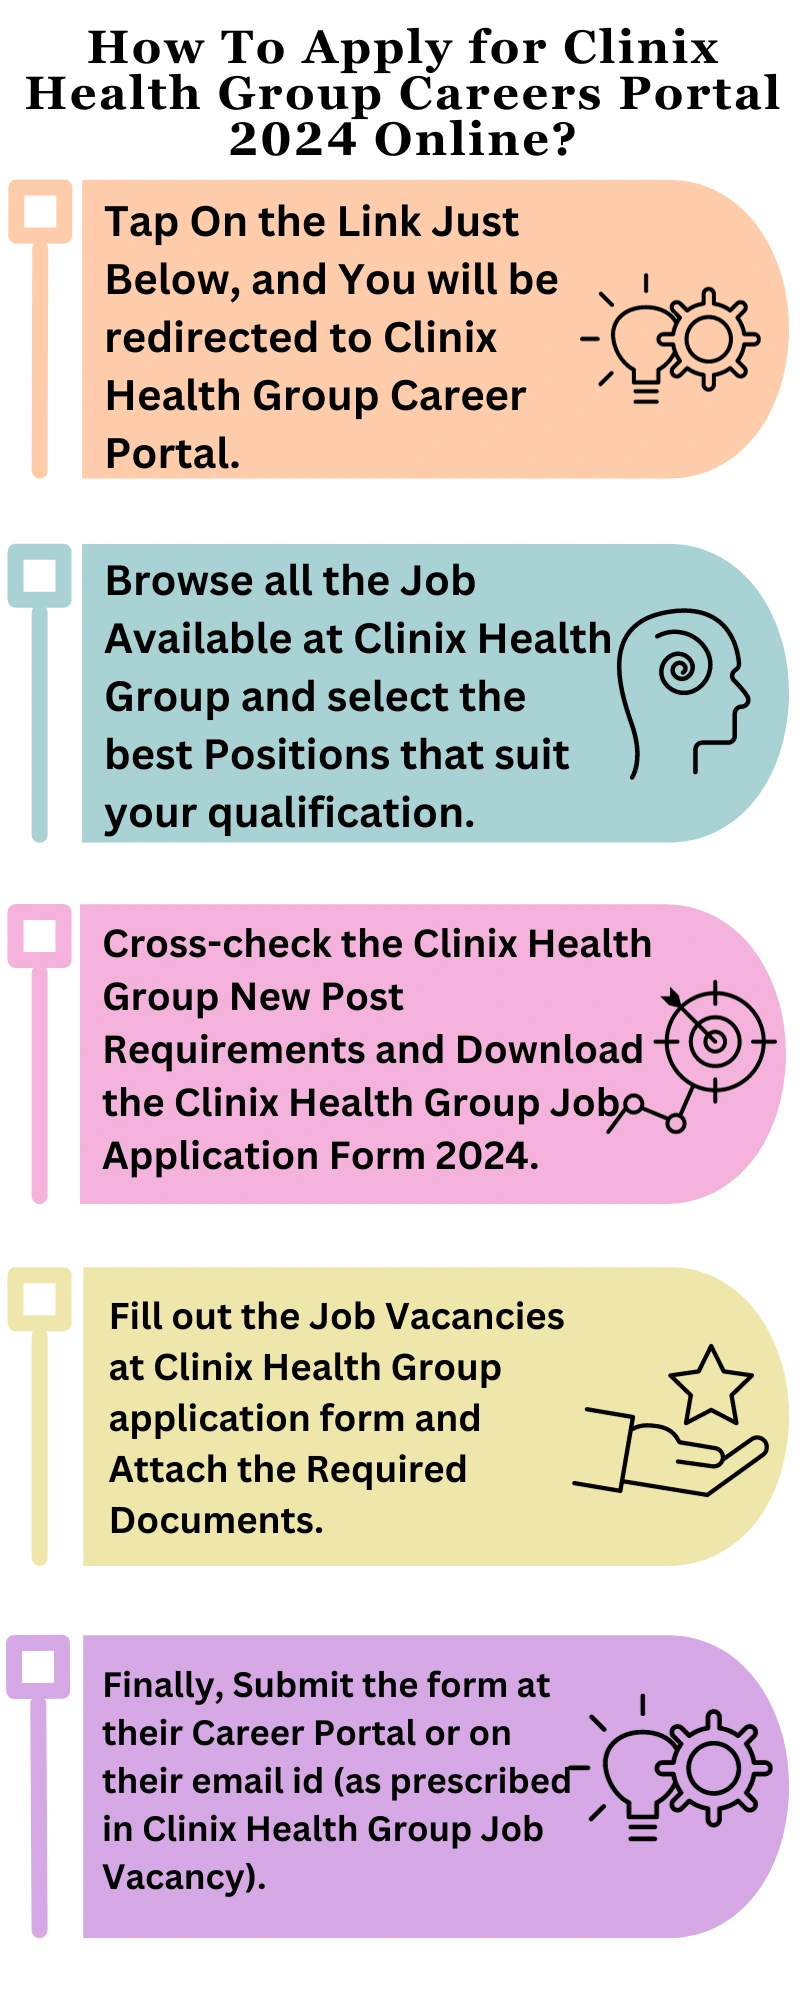 How To Apply for Clinix Health Group Careers Portal 2024 Online?